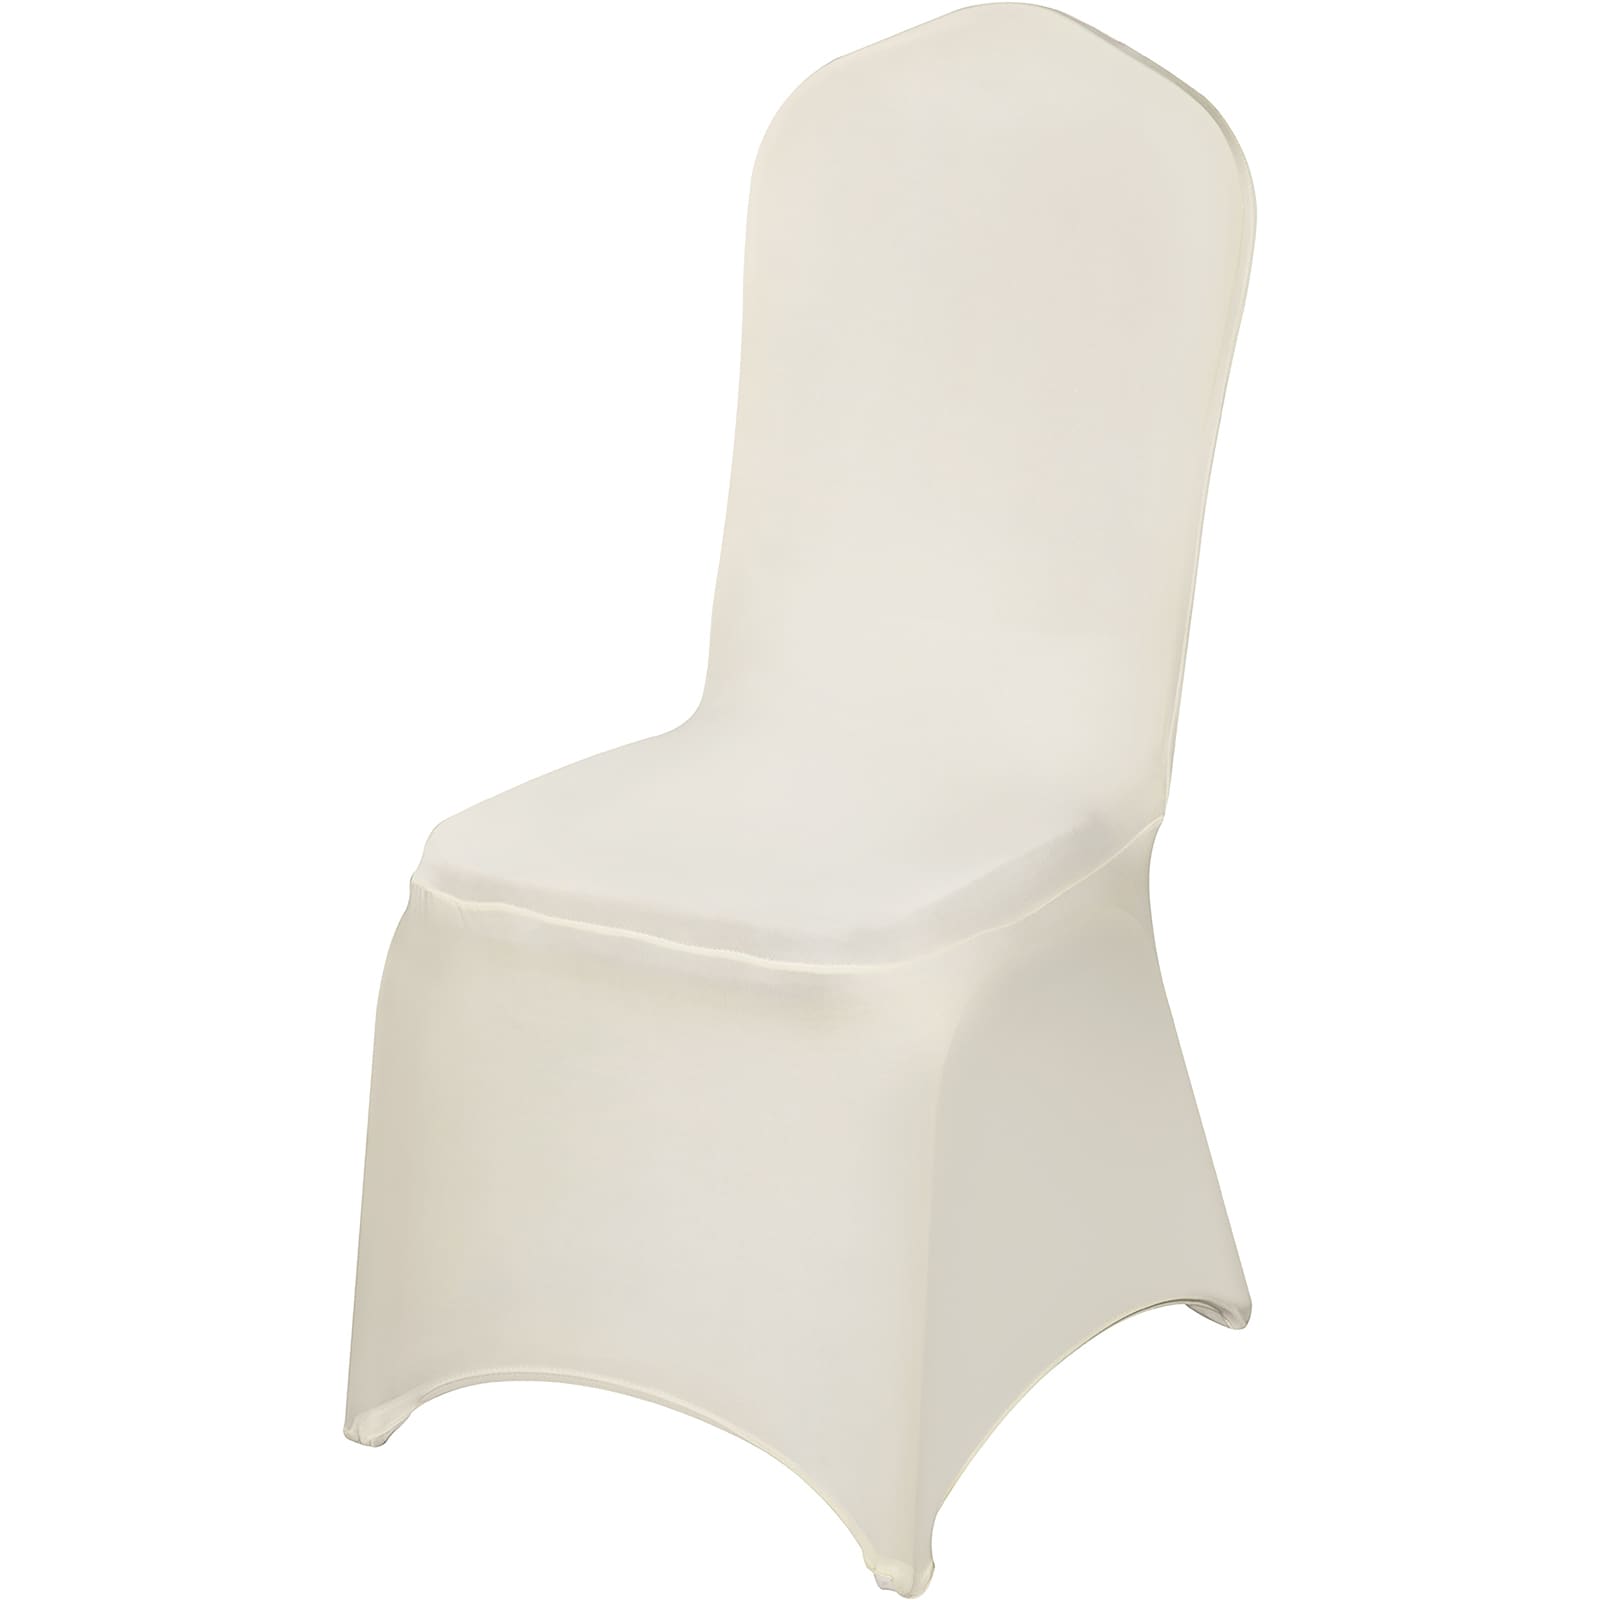 New Design 100% Poly Universal Banquet Spandex Chair Cover For